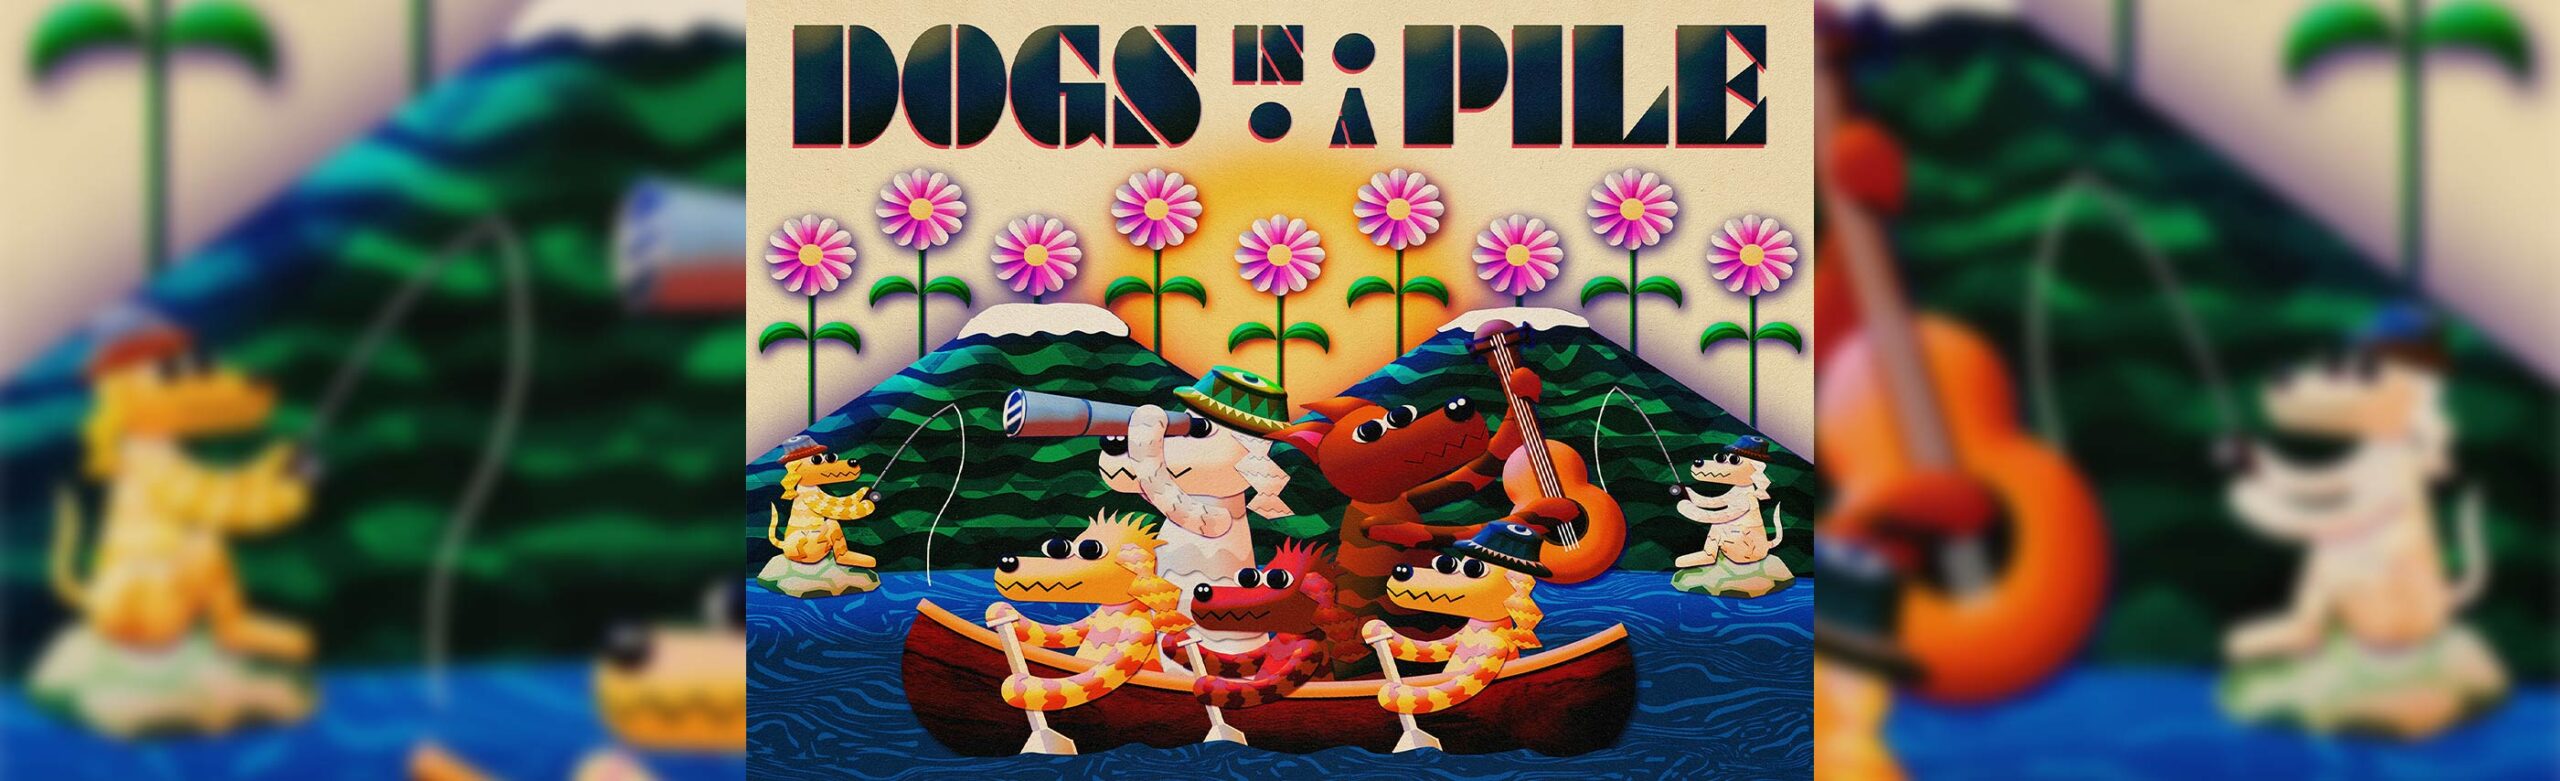 Dogs In A Pile Announce Concert in Bozeman Image